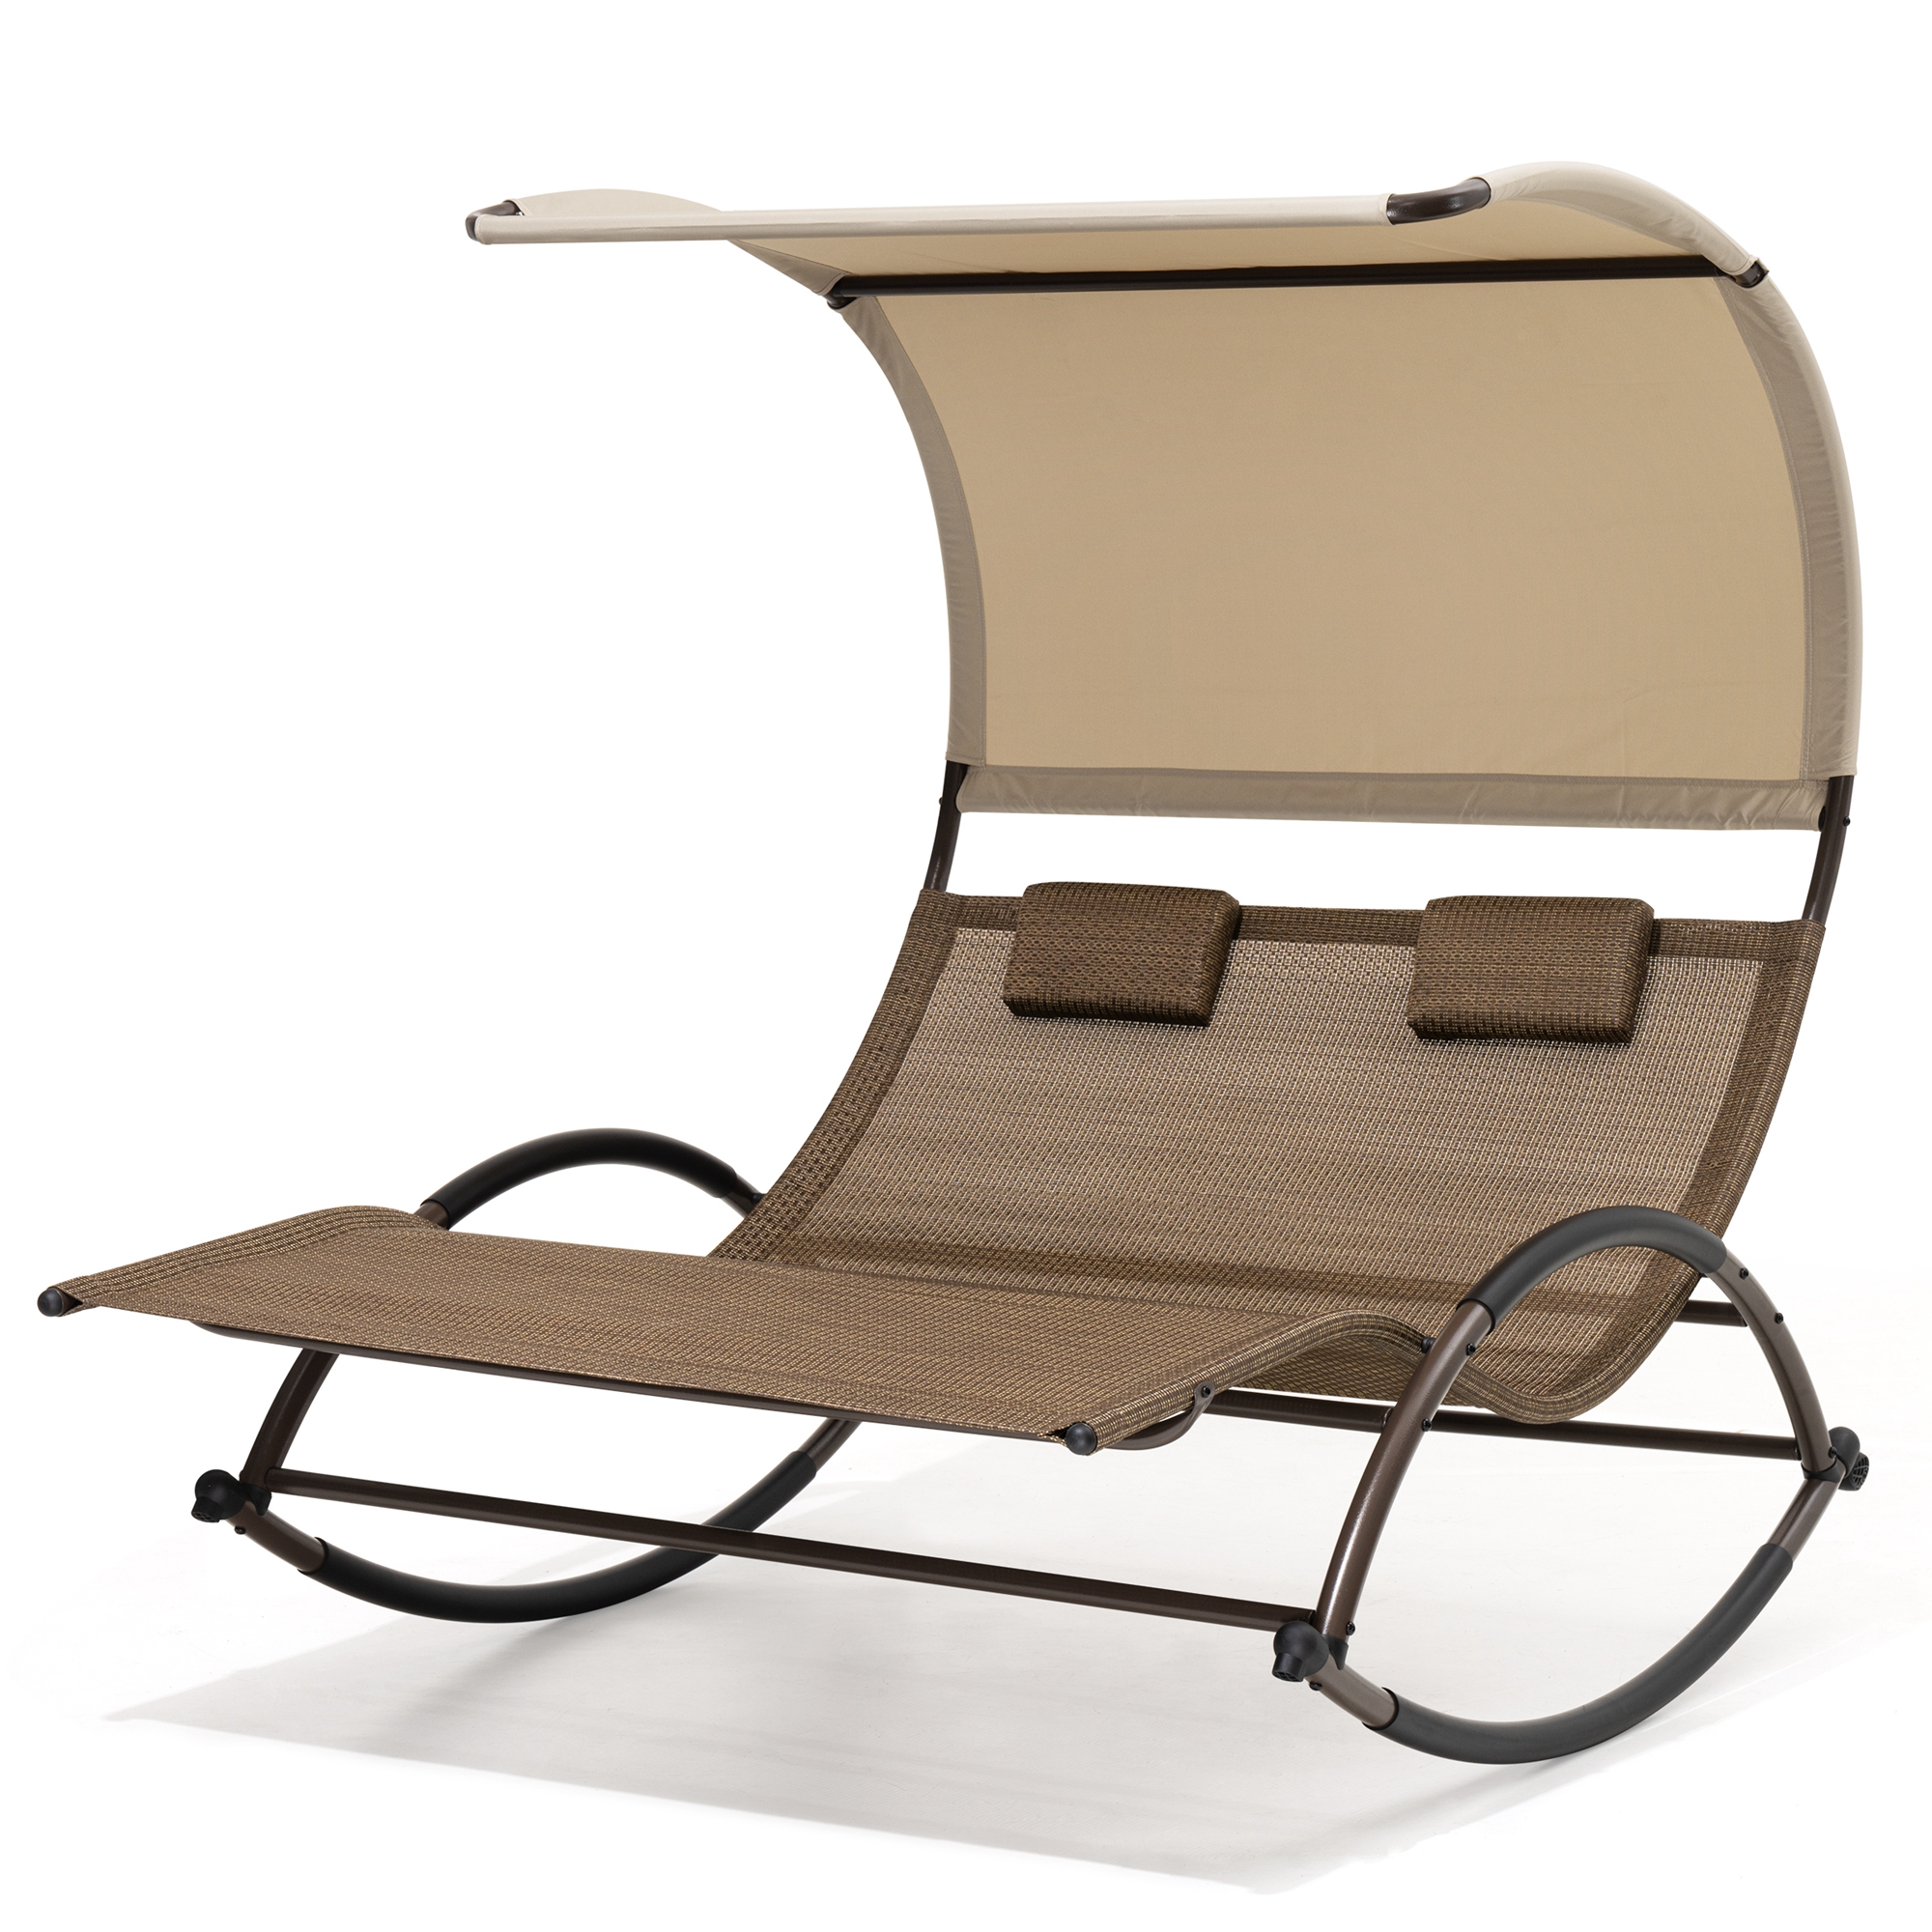 Pellebant Outdoor Double Chaise Lounge with Shade Patio Metal Rocking Chair in Brown - image 1 of 7